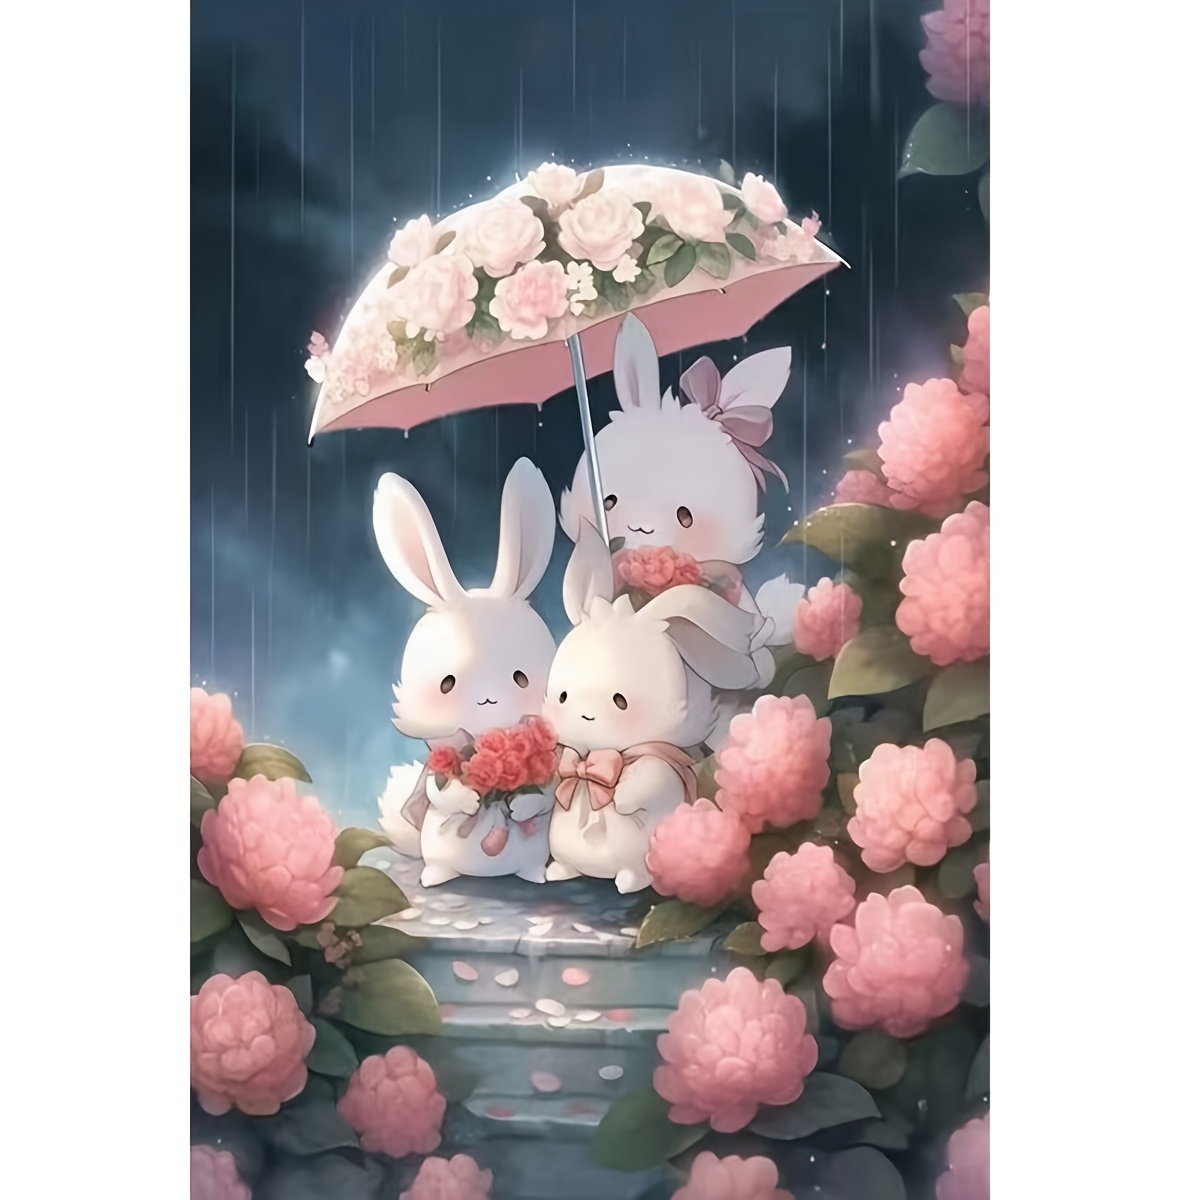 

3 Rabbits Round Full Diamond Diamond Art Painting Cross Stitch Kits, 5d Art Diy Handmade Crafts For Beginners Adults, Birthday Holiday Gifts, Wall Home Decorations, Frameless 20cm*30cm.7.87in*11.81in